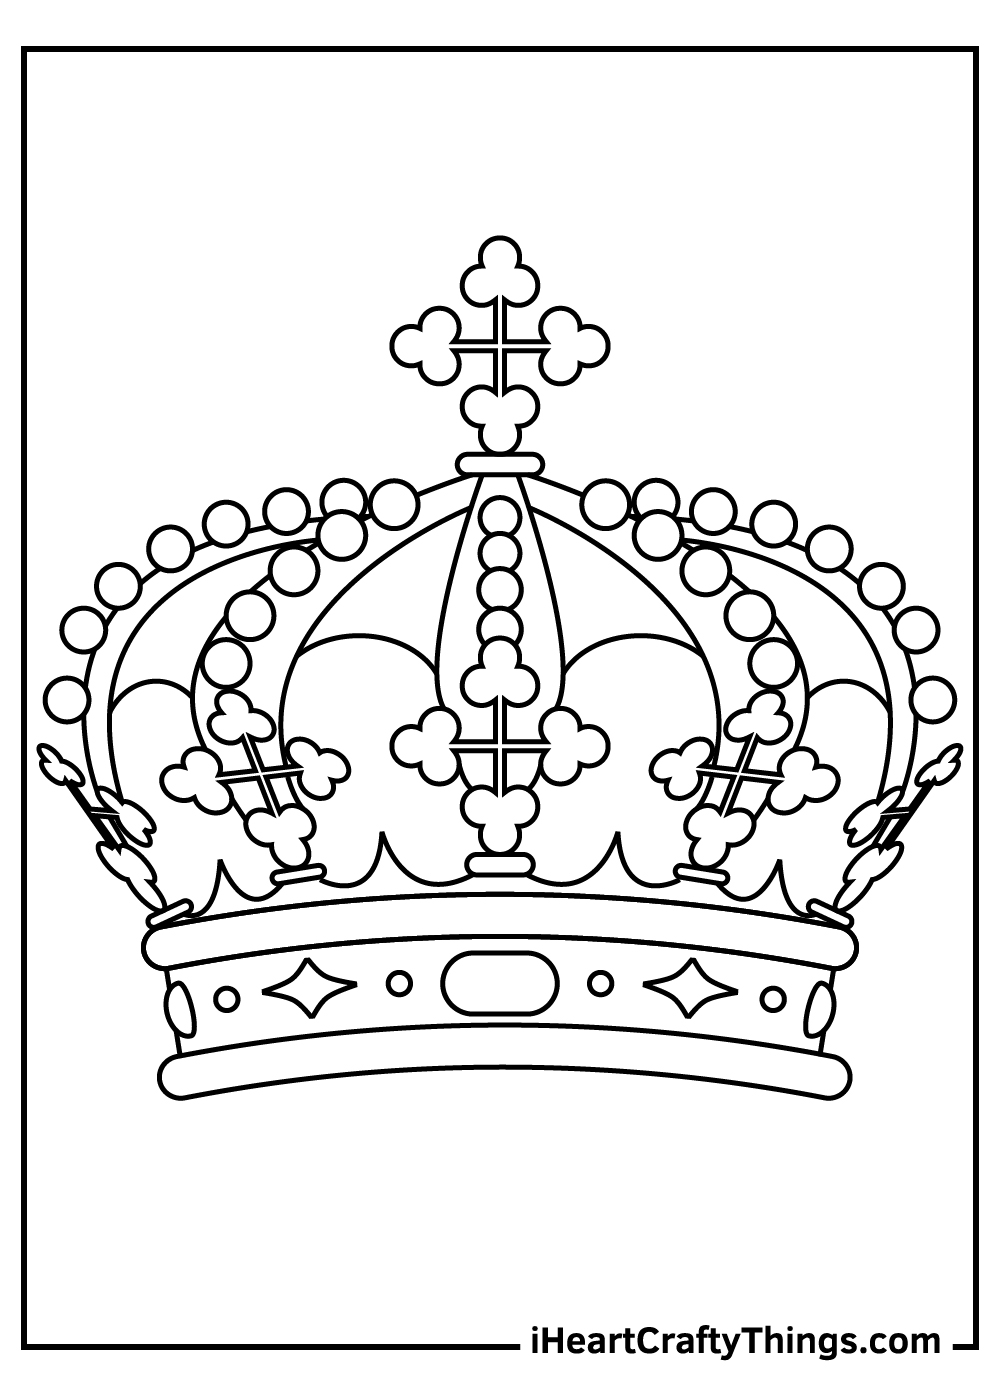 Crown coloring pages free printables